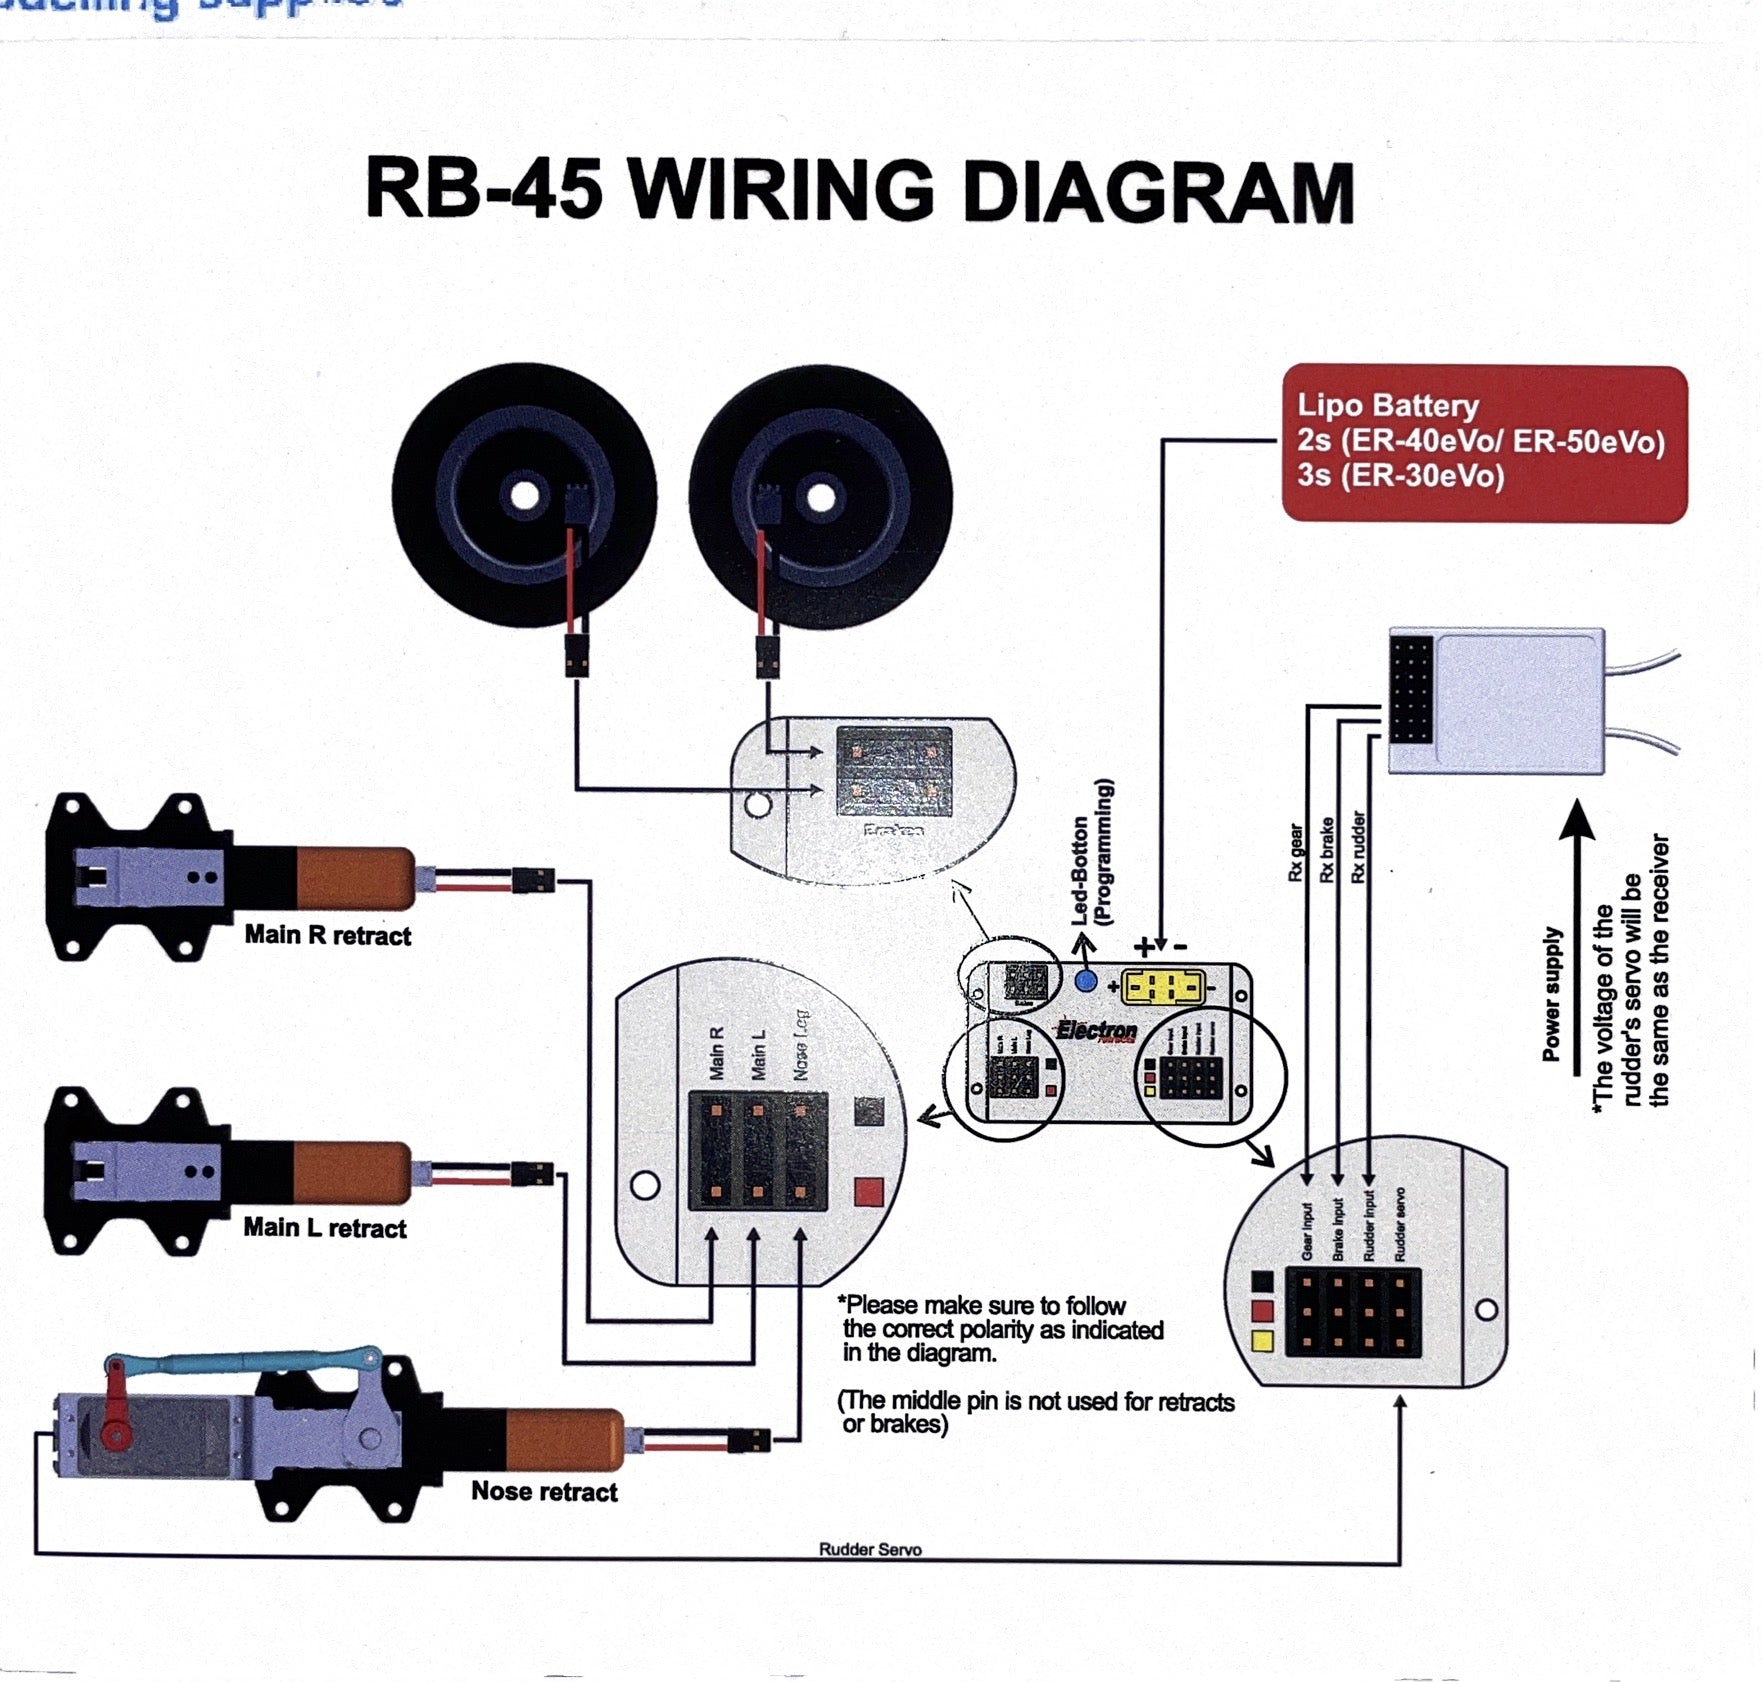 RB-45 Landing Gear Controller for ER40 from Electron Retracts RB45